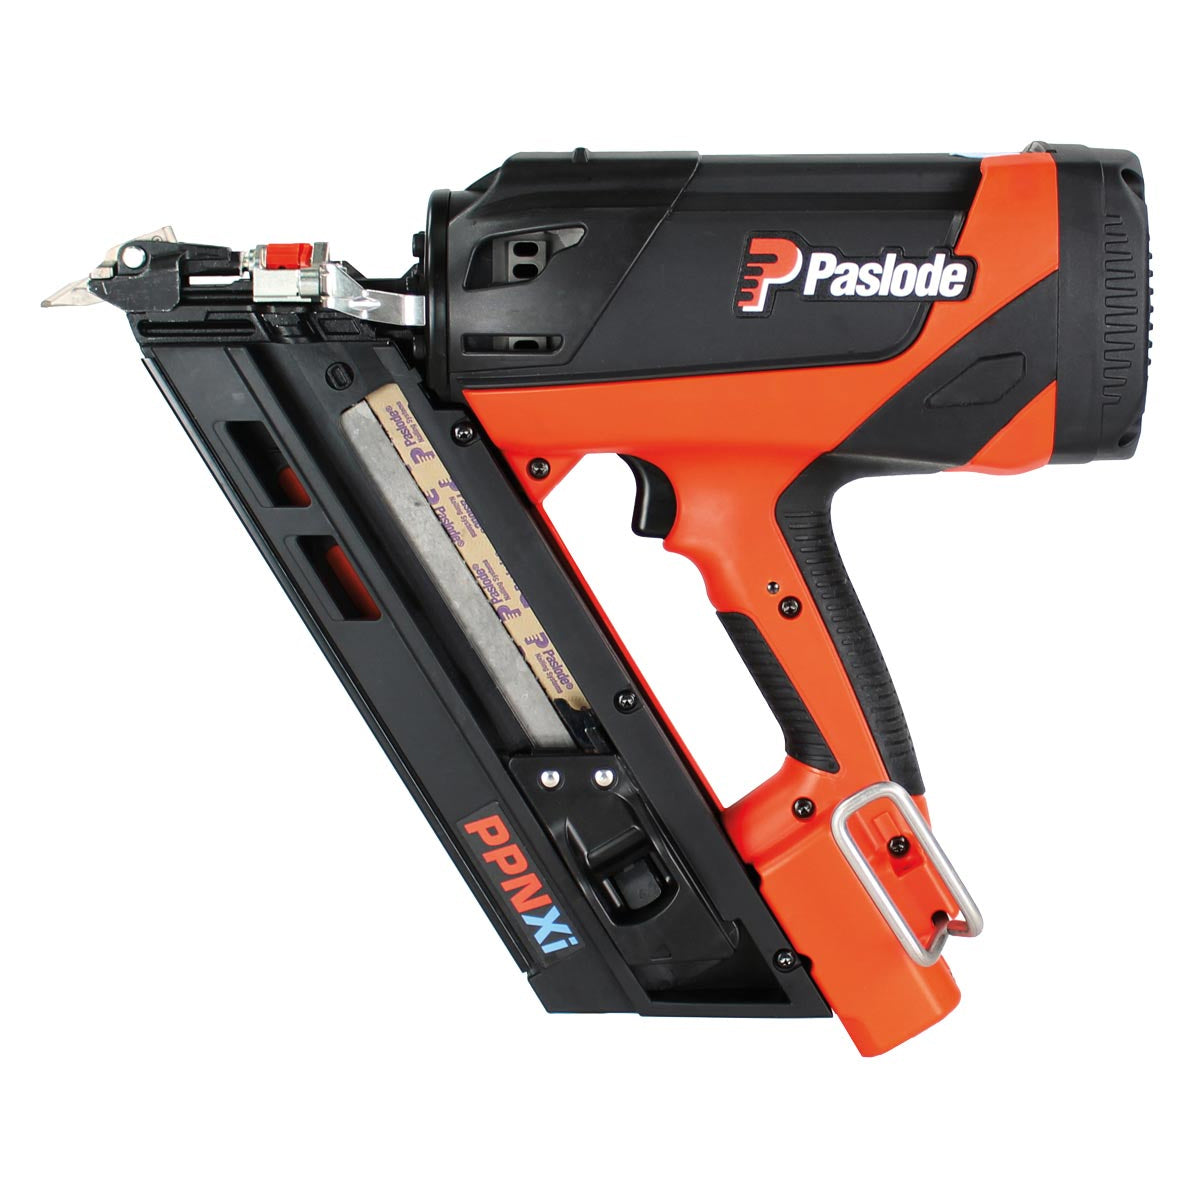 Paslode PPNXI 7.4V Cordless First Fix Gas Nailer with 1 x 2.1Ah Battery & Charger 019790